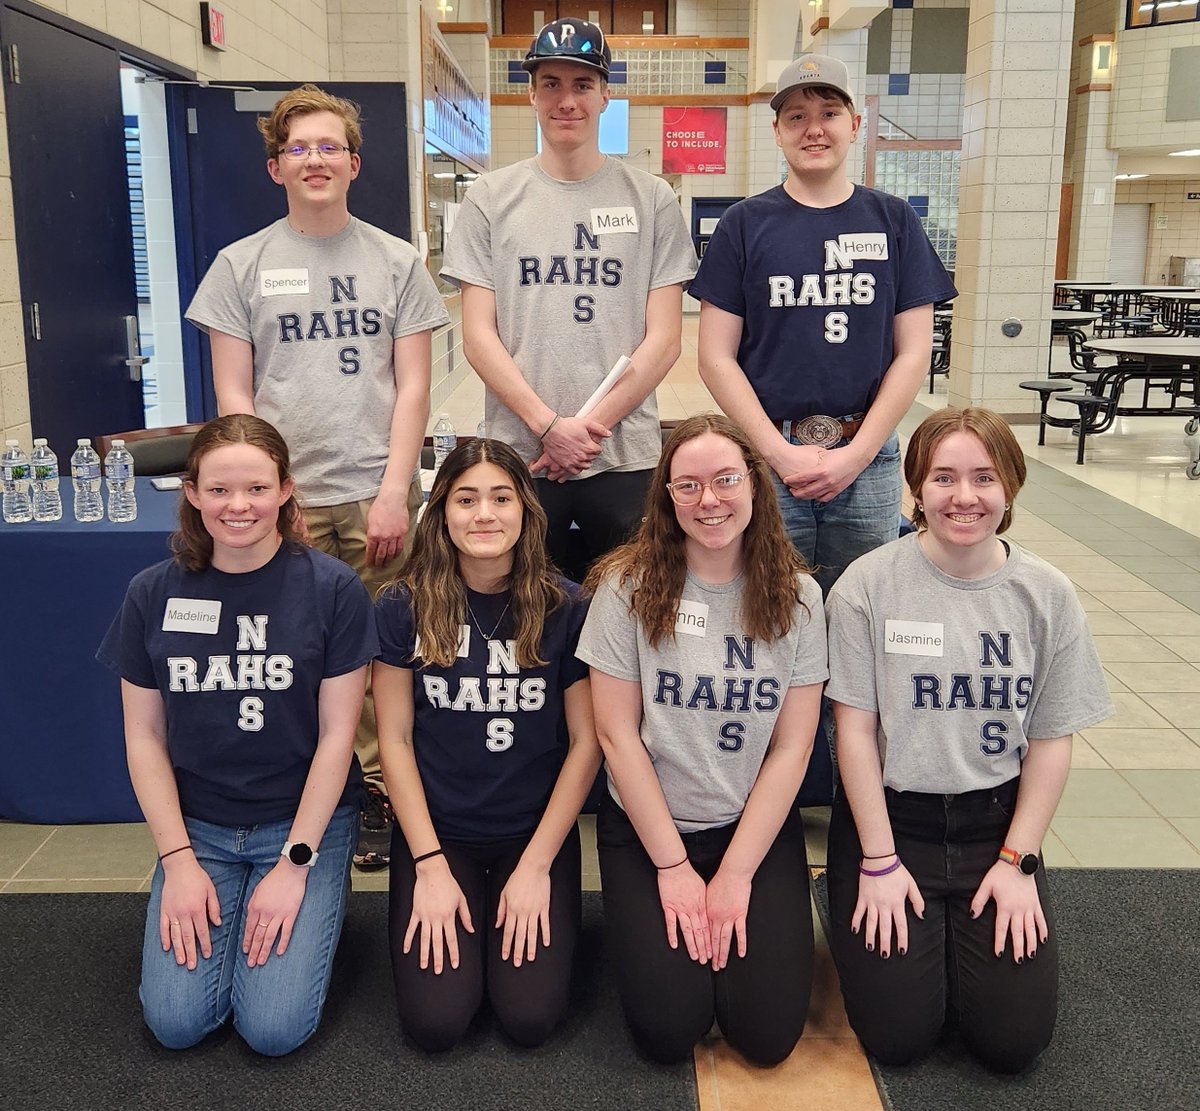 THANK YOU to these @RAHSburg NHS students for helping welcome and situate business leaders and community members during yesterday's Career Event. What a GREAT day! #ReedsburgPride